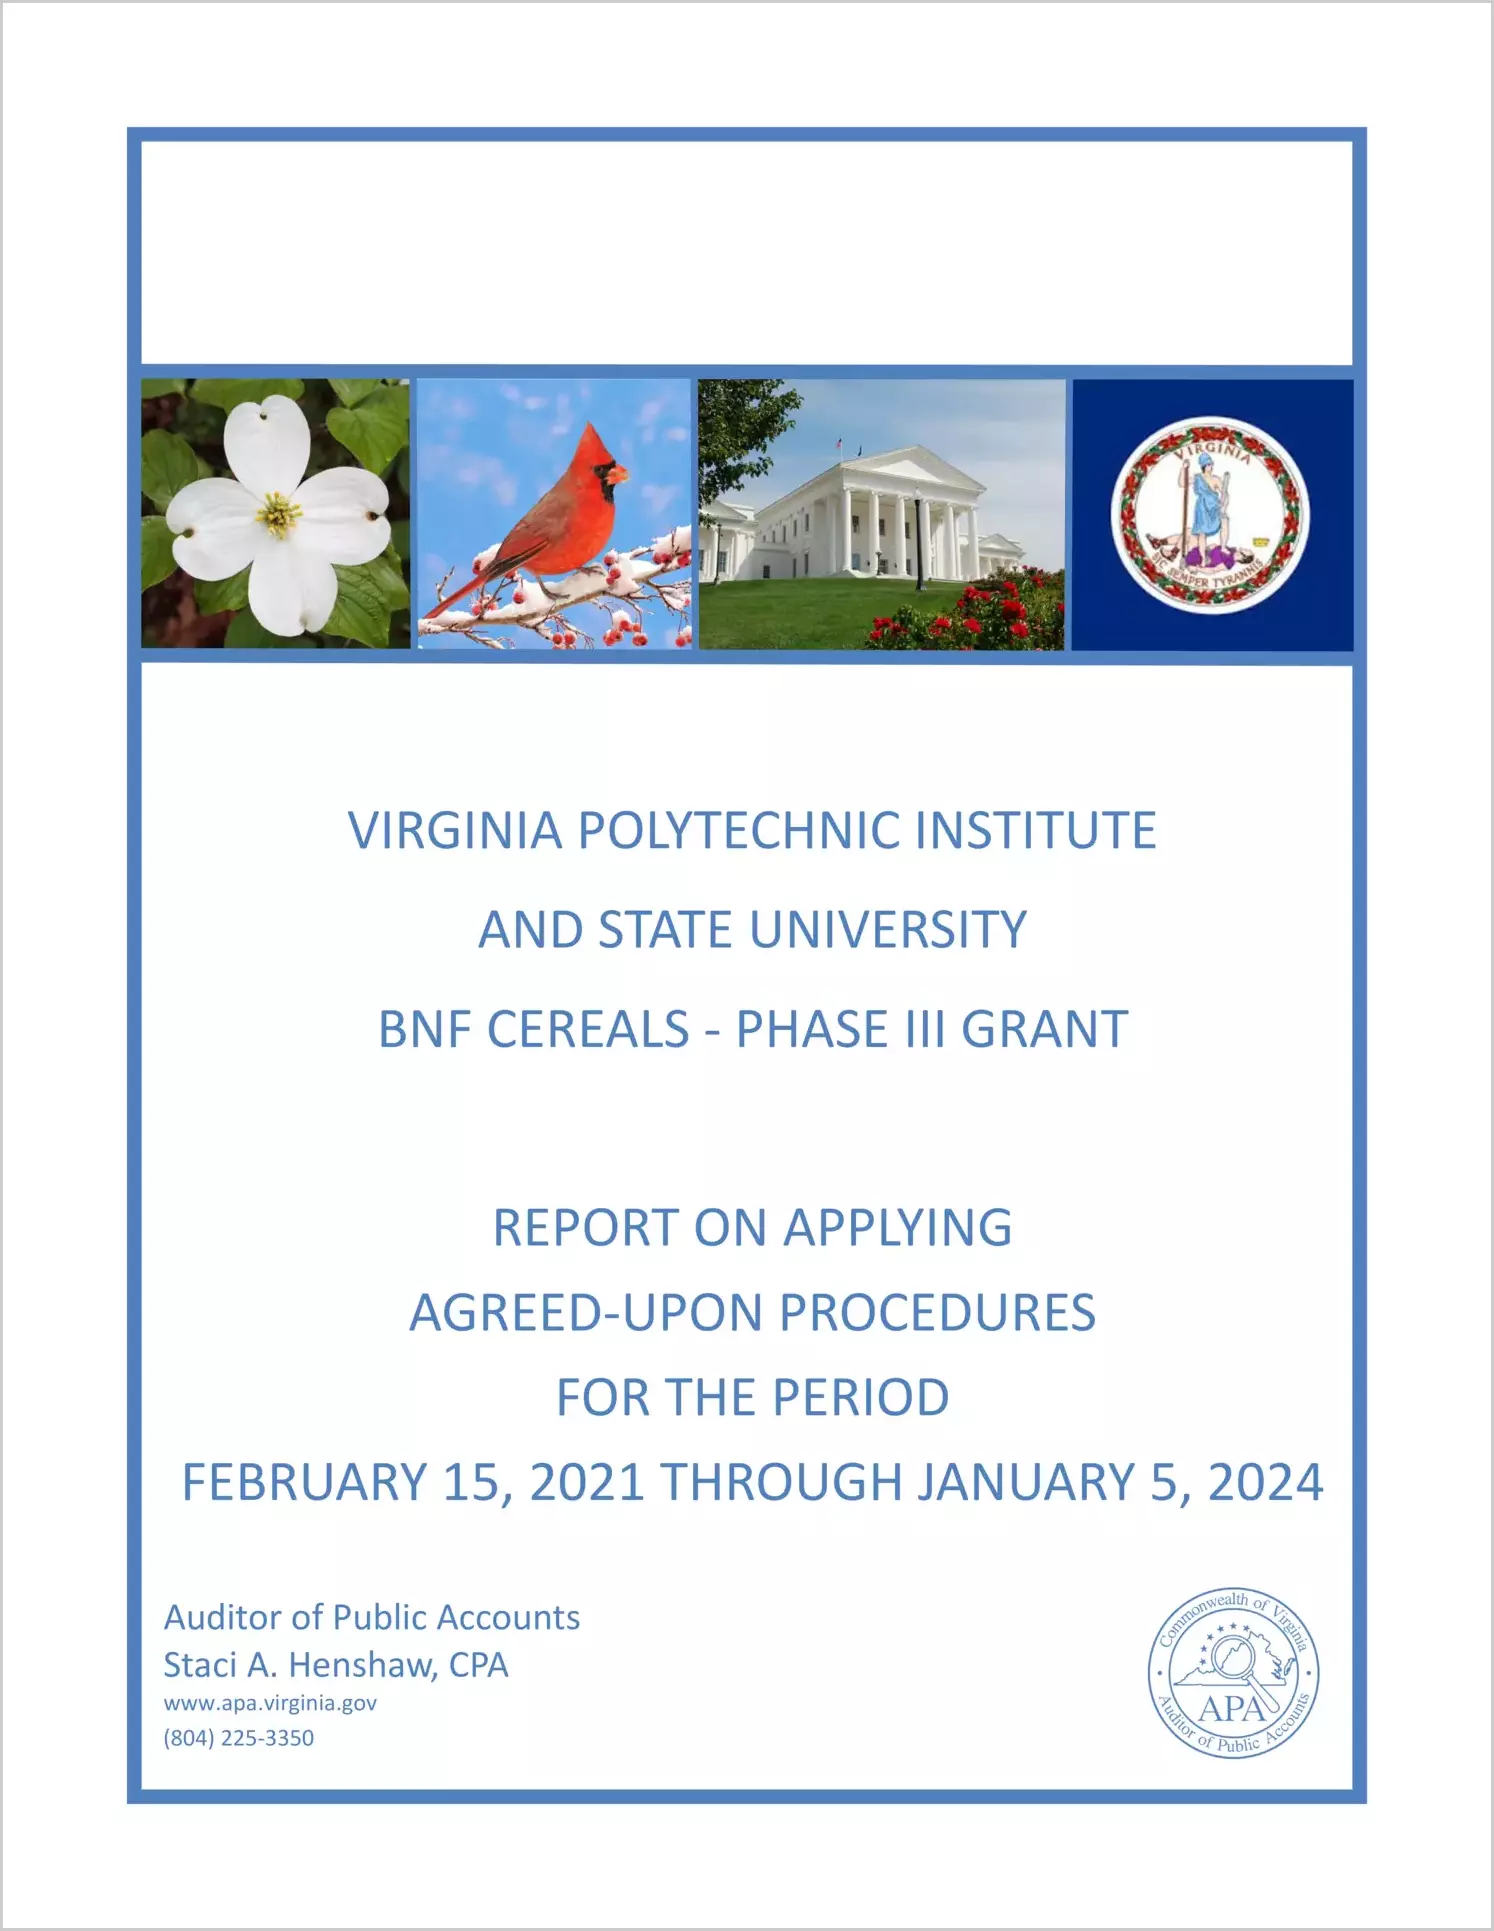 Virginia Polytechnic Institute and State University BNF Cereals - Phase III Grant report on Applying Agreed-Upon Procedures for the period February 15, 2021 through January 5, 2024